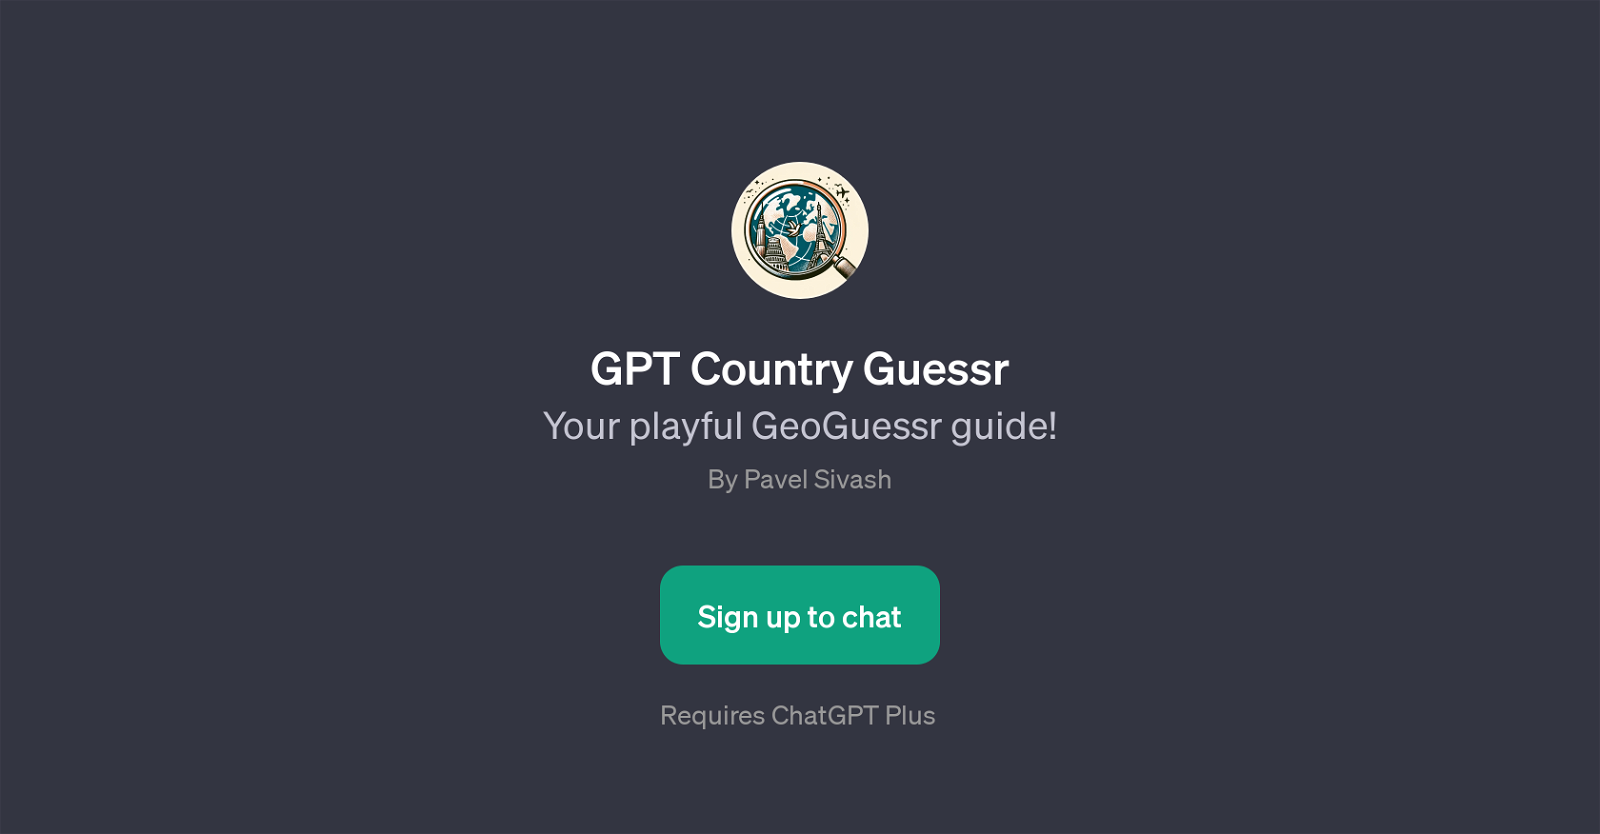 GPT Country Guessr website